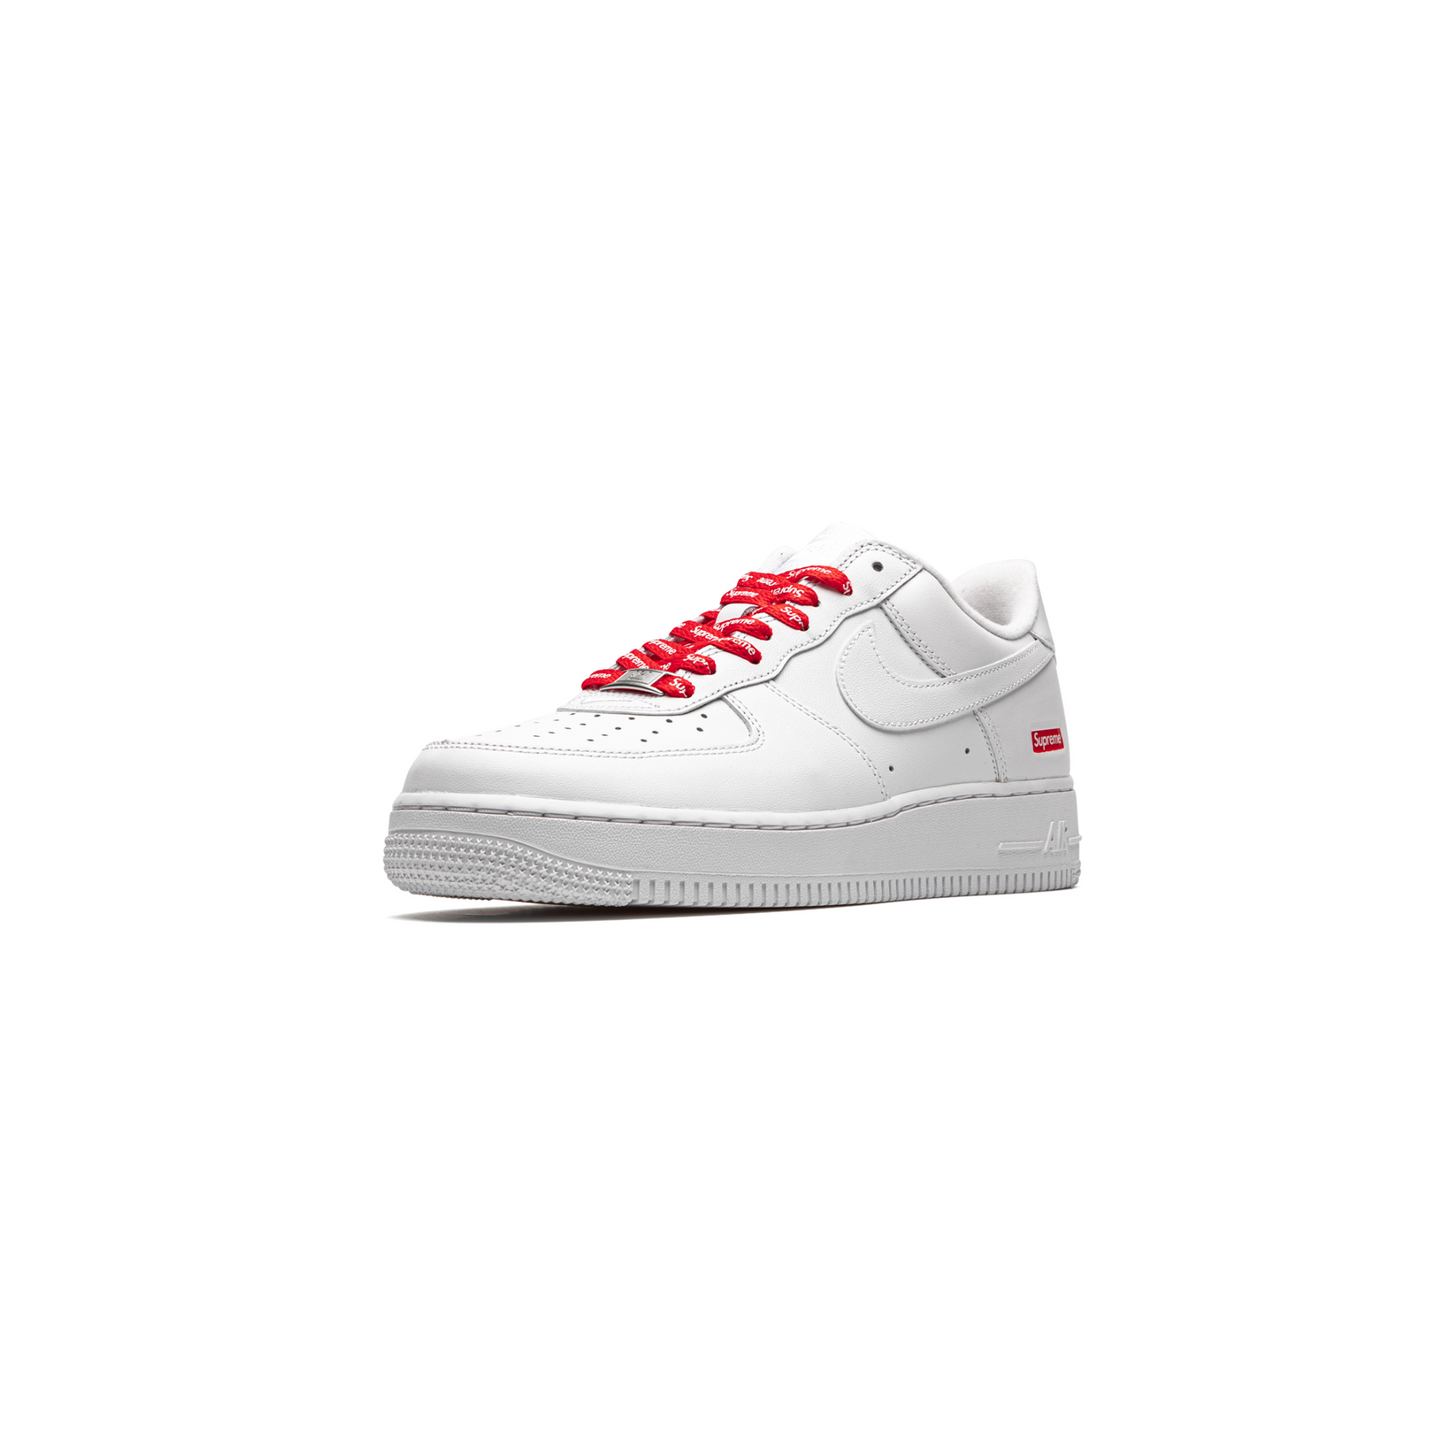 THE SUPREME X AIR FORCE 1 LOW - WHITE